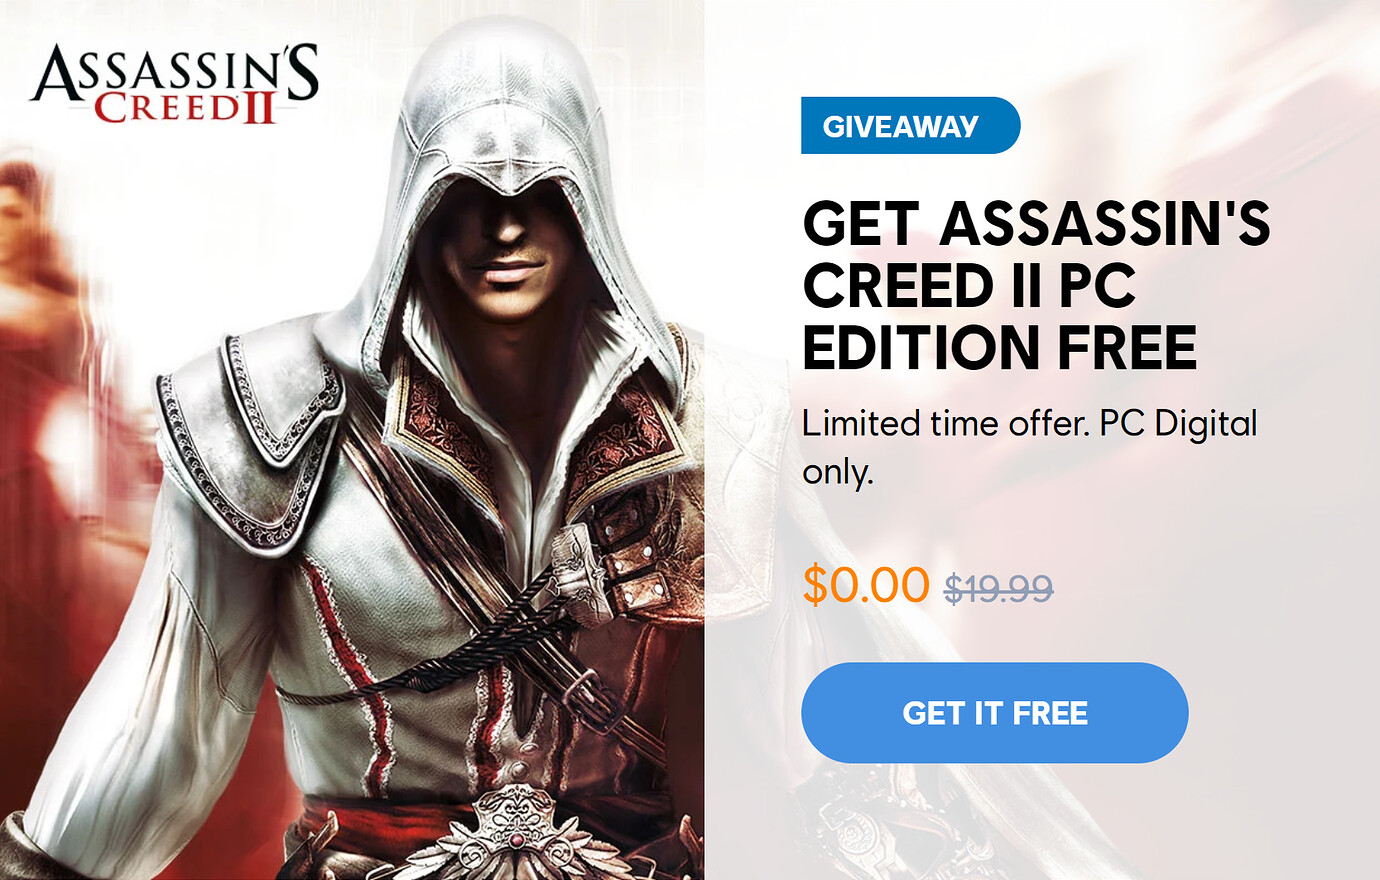 Assasin Screed 2 Deluxe. Assassins Creed 2 Deluxe Edition. Assassin's Creed 2 Делюкс эдишн лого. Assassin's Creed диск ПК Аклла лицензия. Русификатор ассасин крид 2